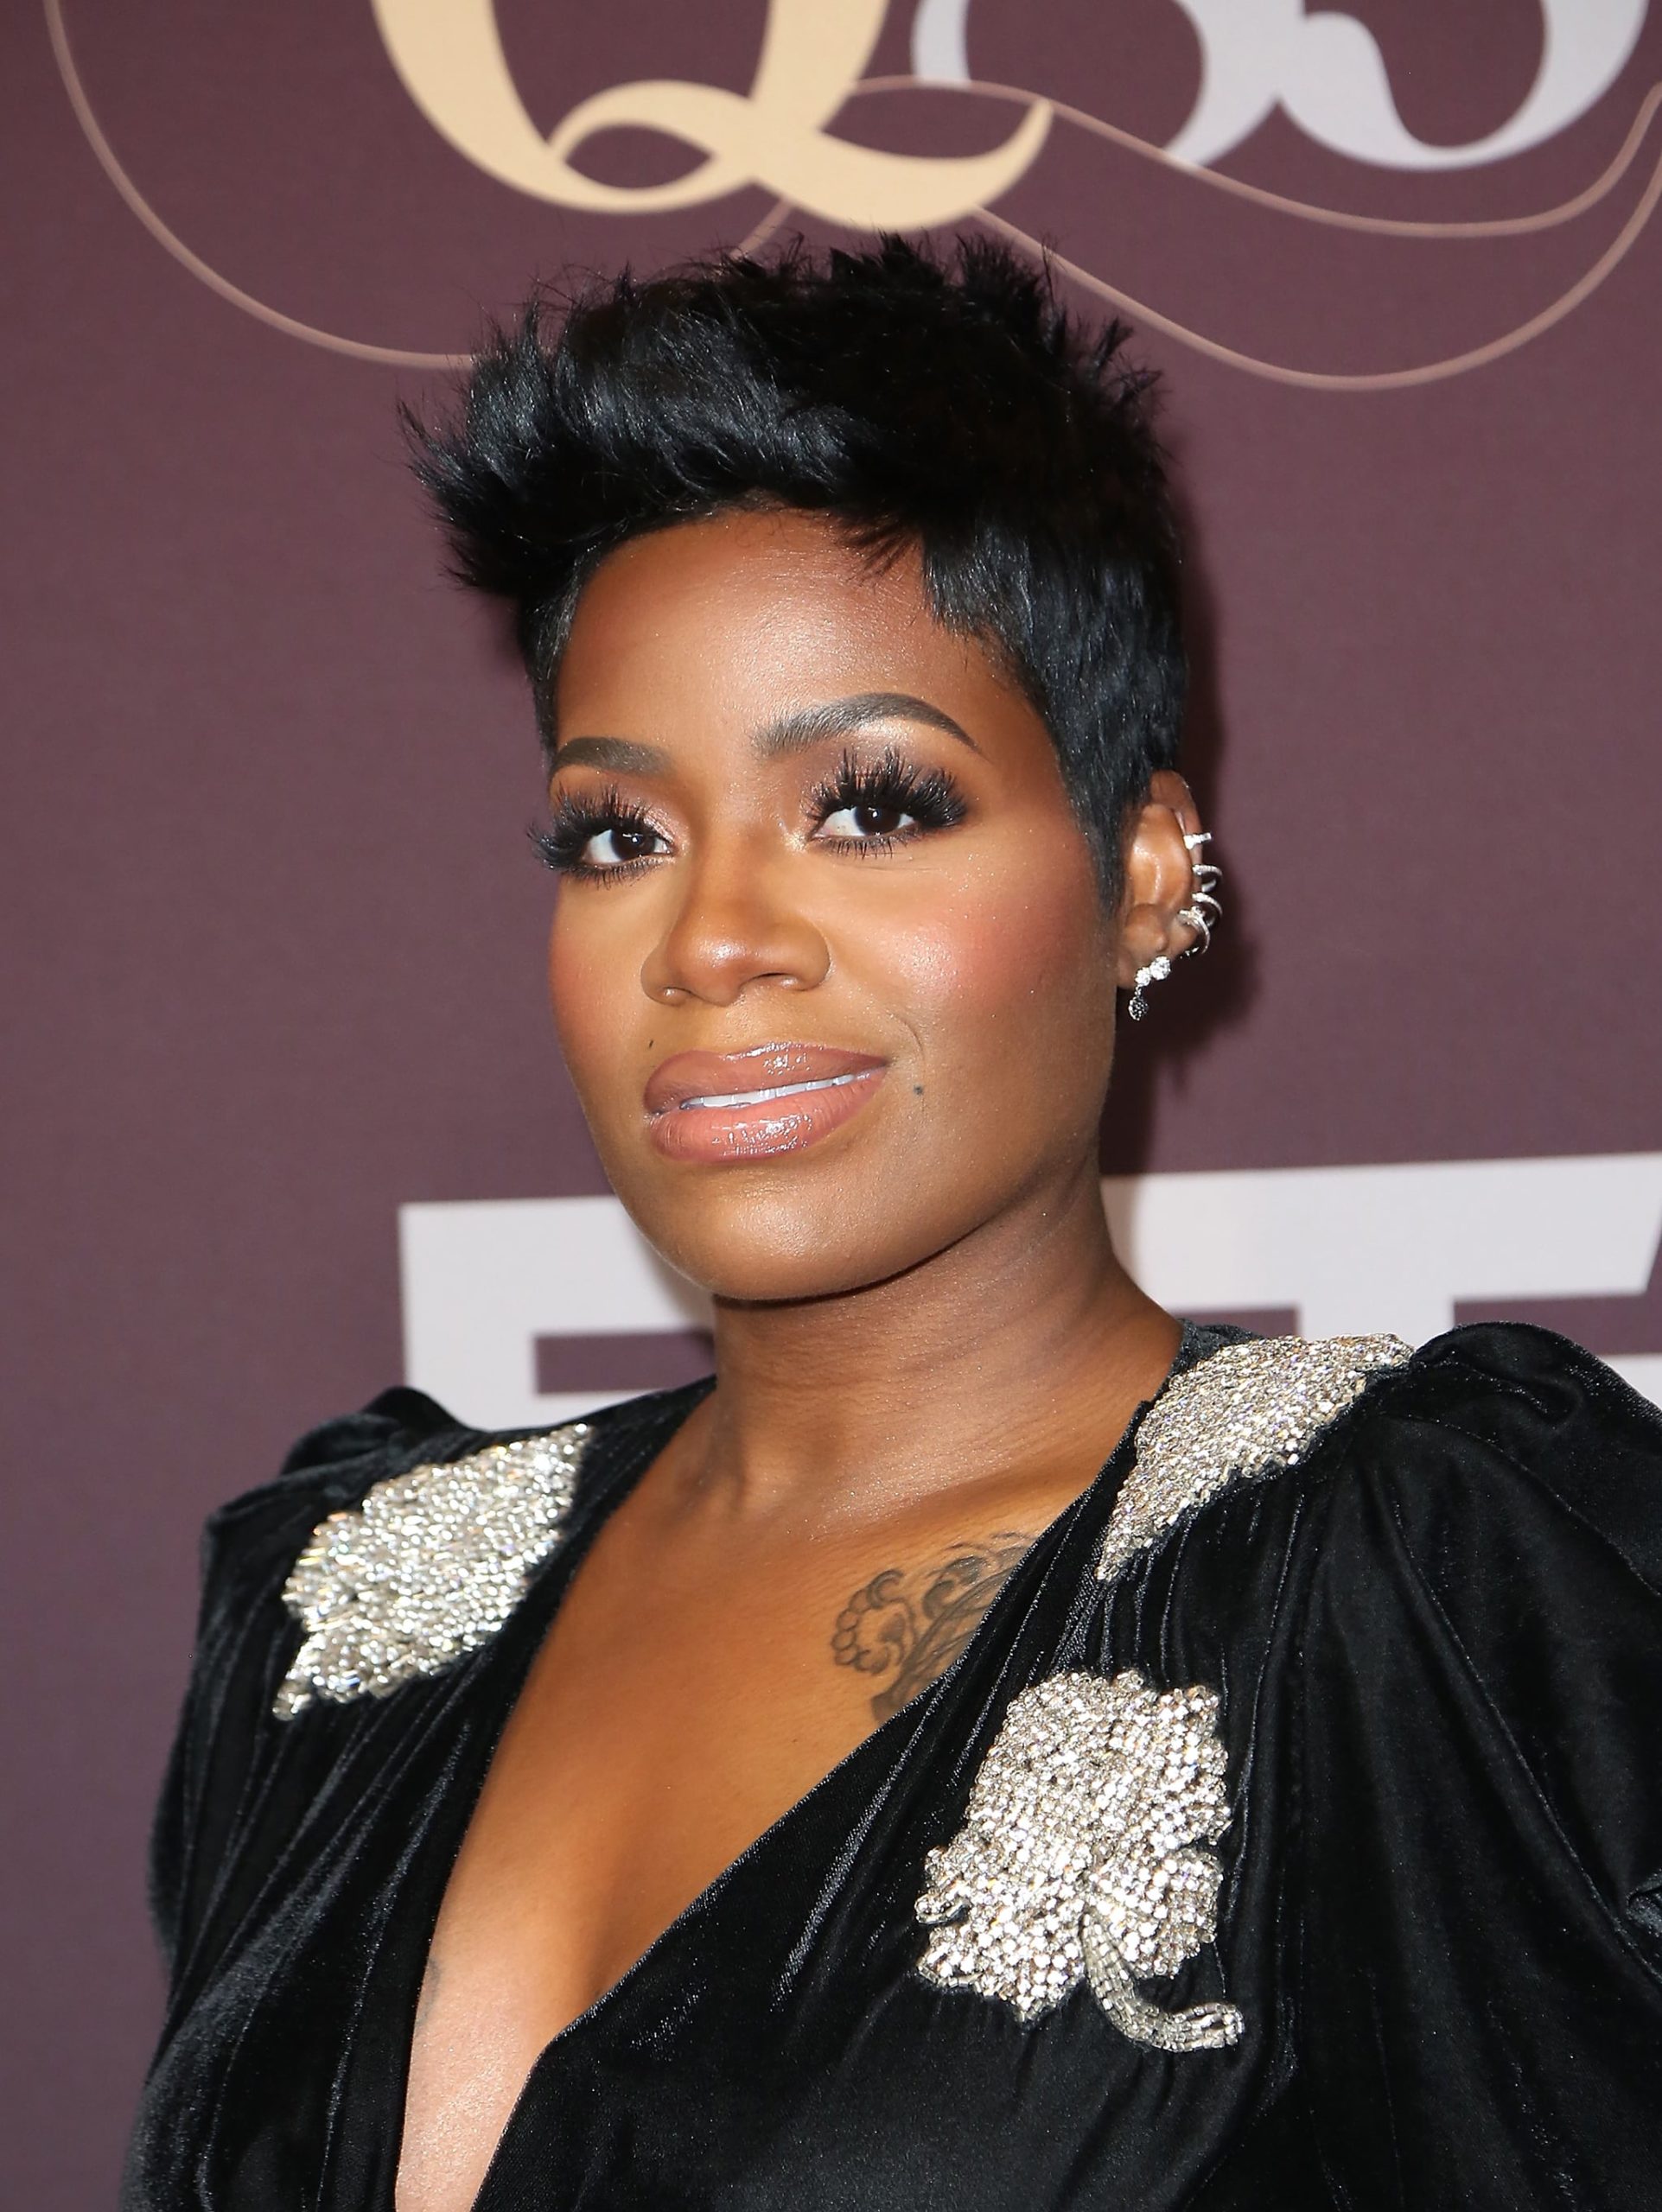 Fantasia Barrino’s son impresses his mom with a cool outfit